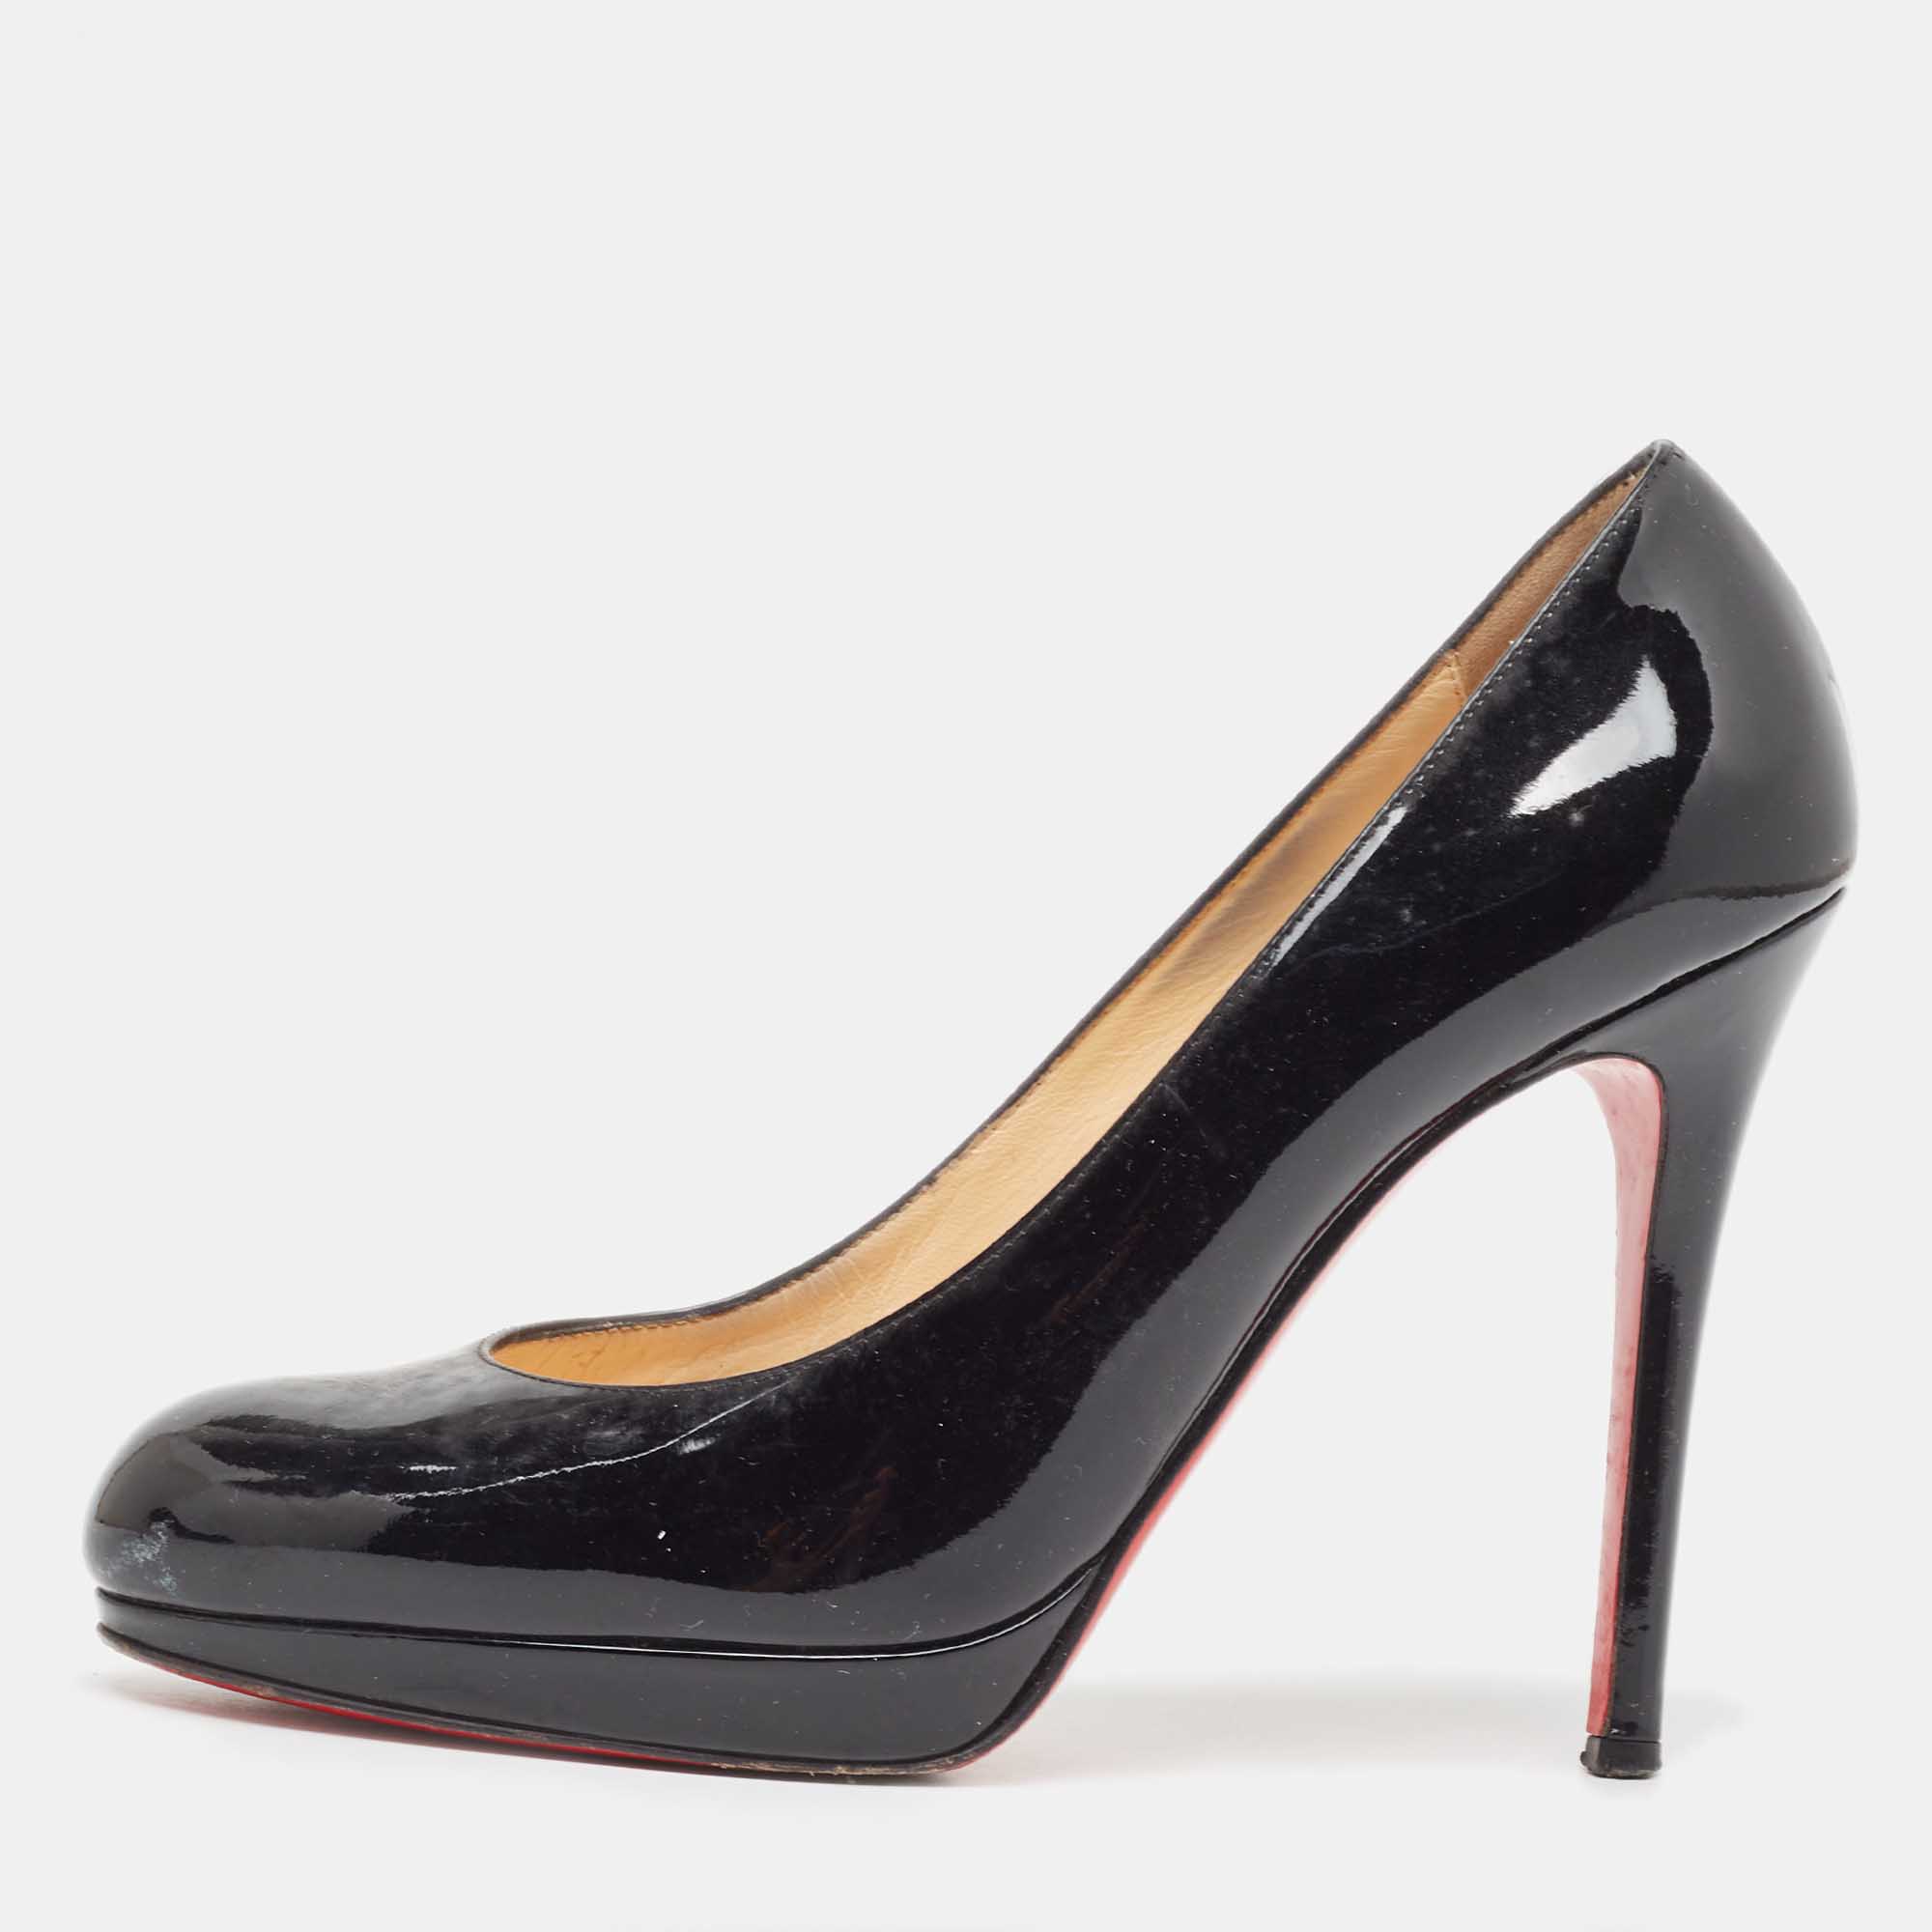 Christian louboutin black patent leather new simple pumps size 37.5